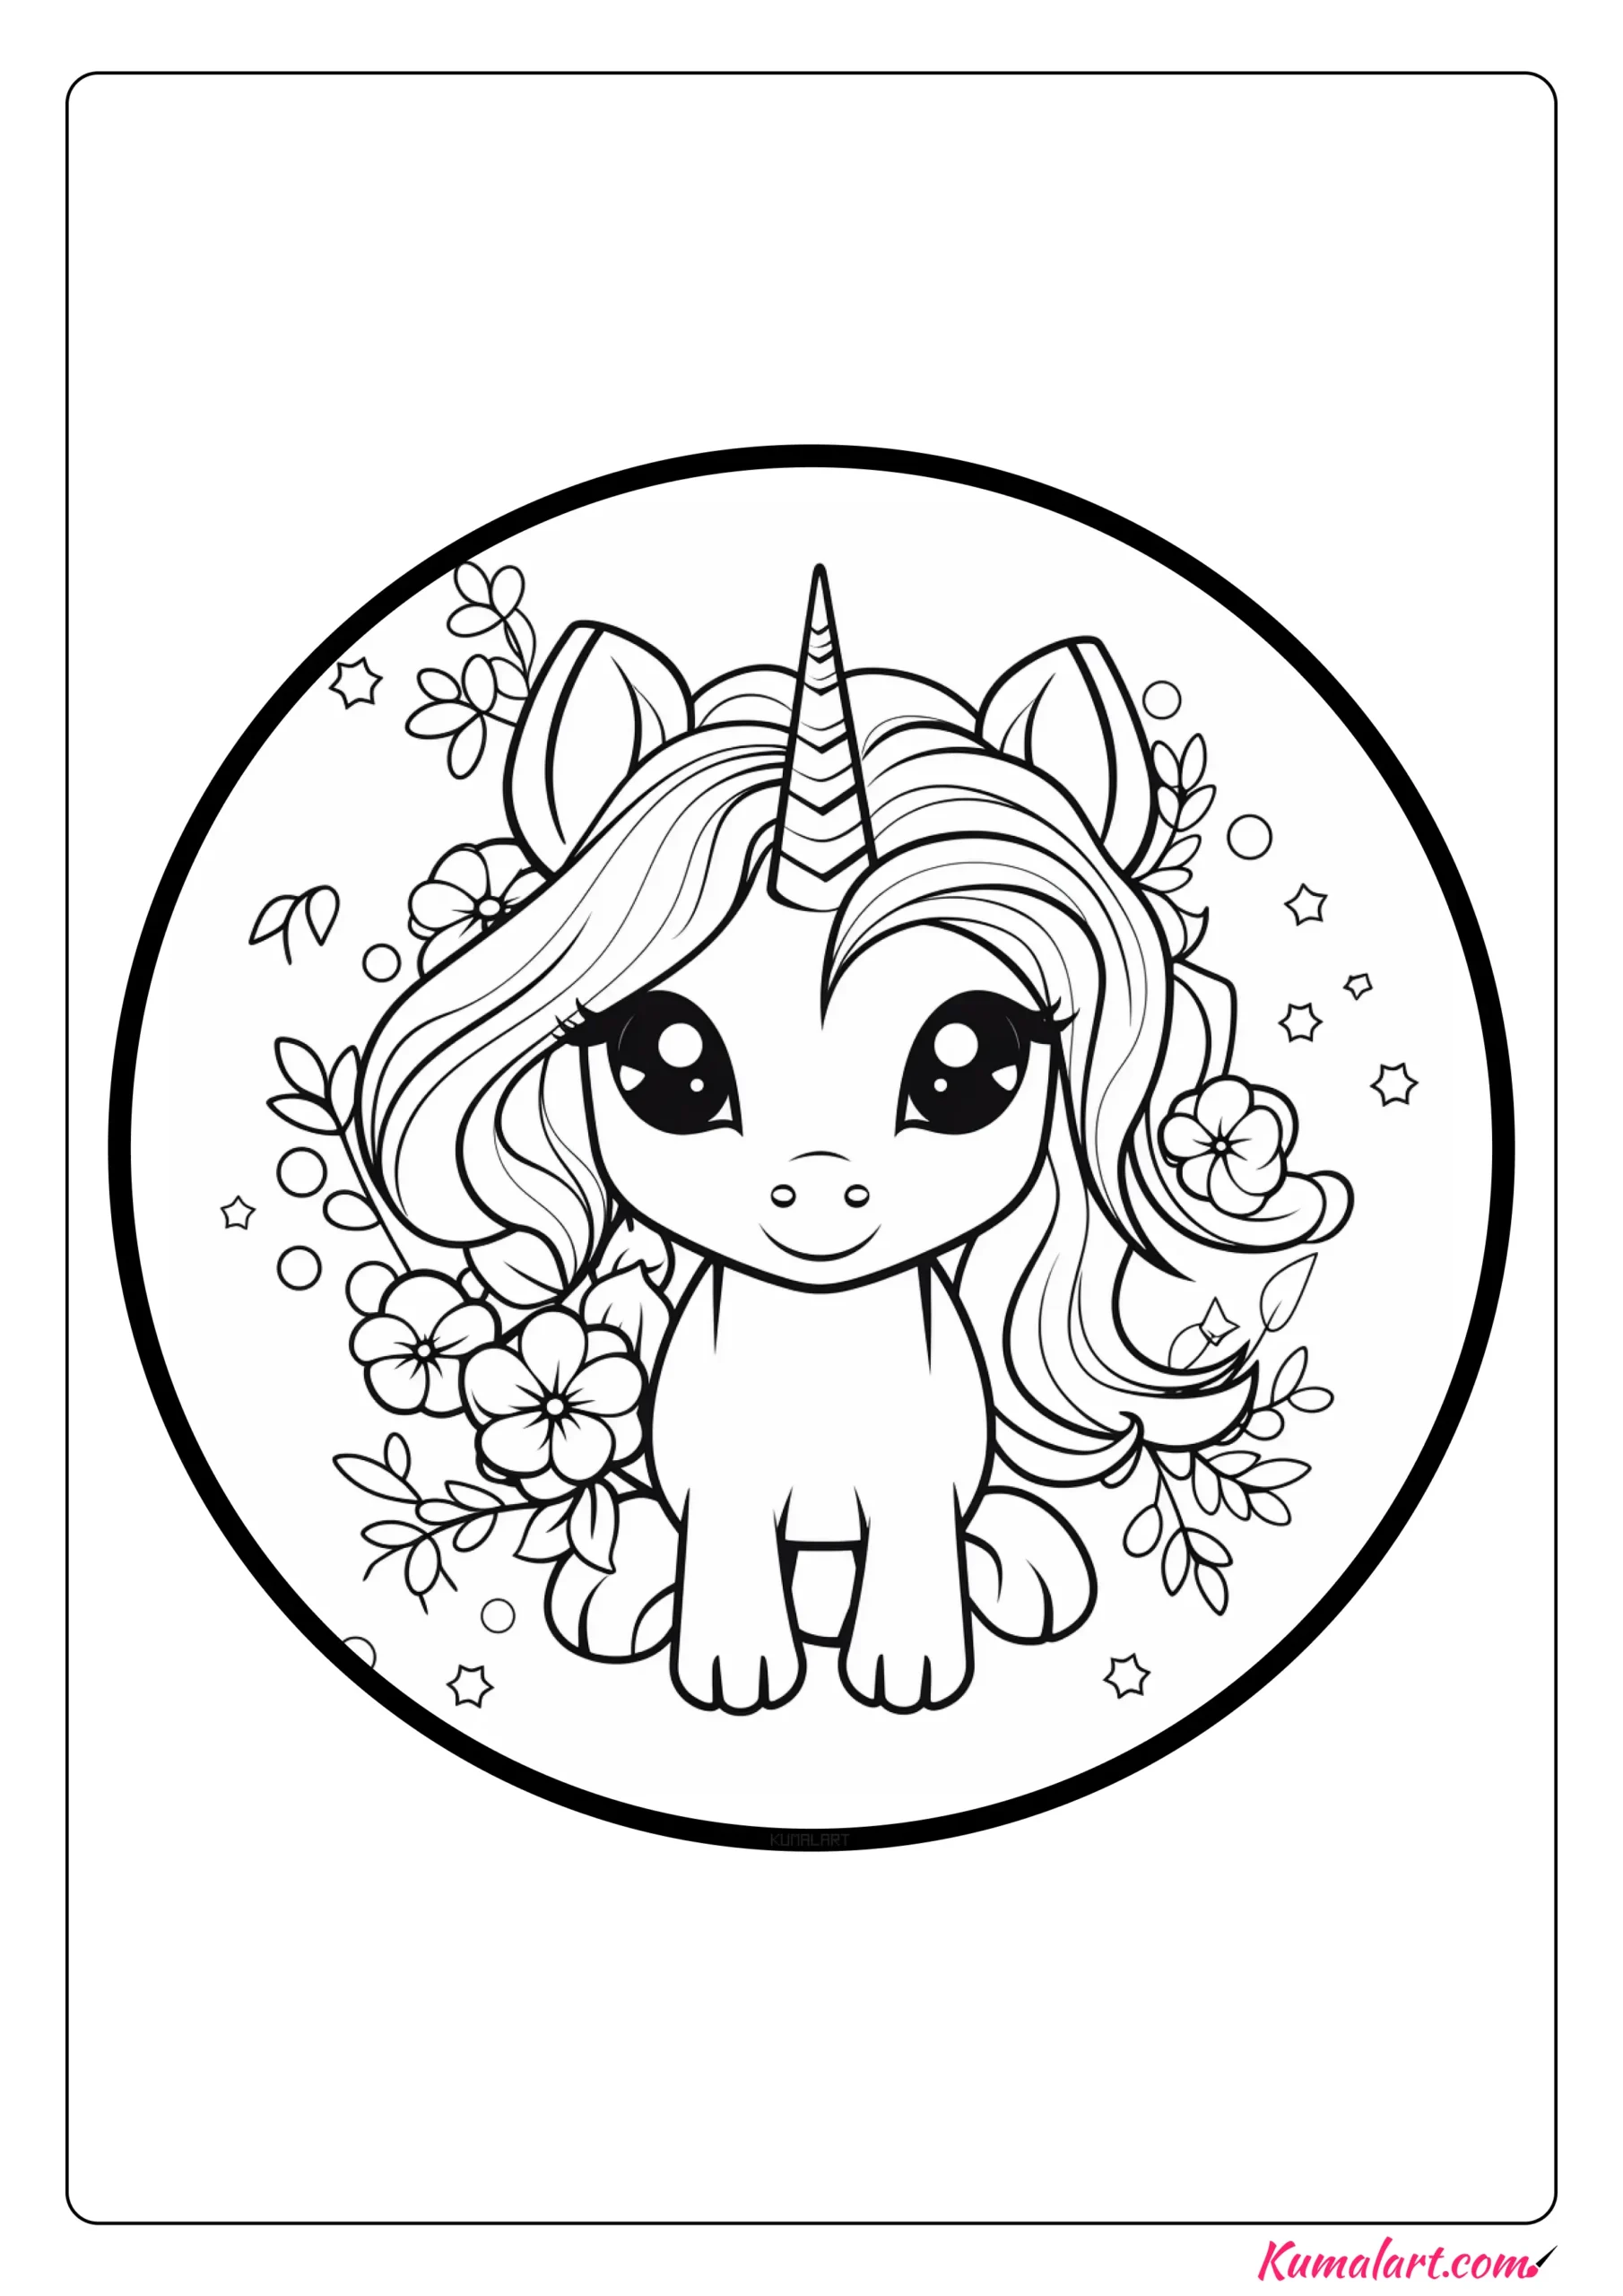 Charlie Fancy Unicorn Coloring Page